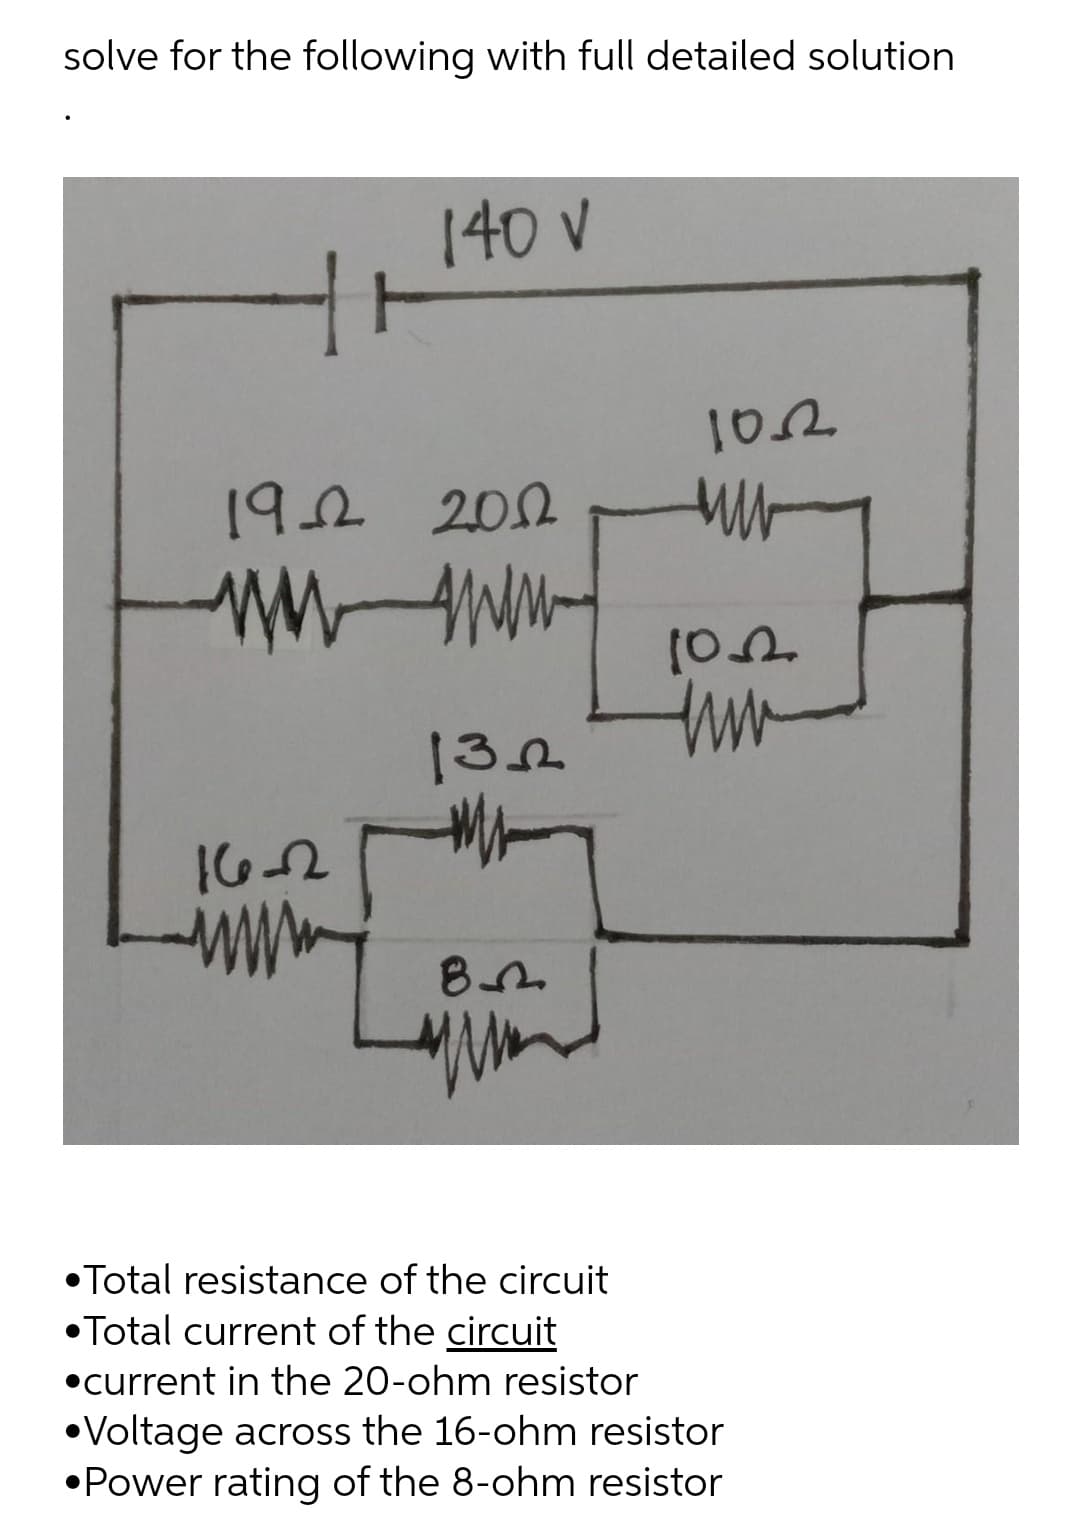 solve for the following with full detailed solution
140 V
192 2012
132
162
www.
•Total resistance of the circuit
• Total current of the circuit
•current in the 20-ohm resistor
•Voltage across the 16-ohm resistor
•Power rating of the 8-ohm resistor
